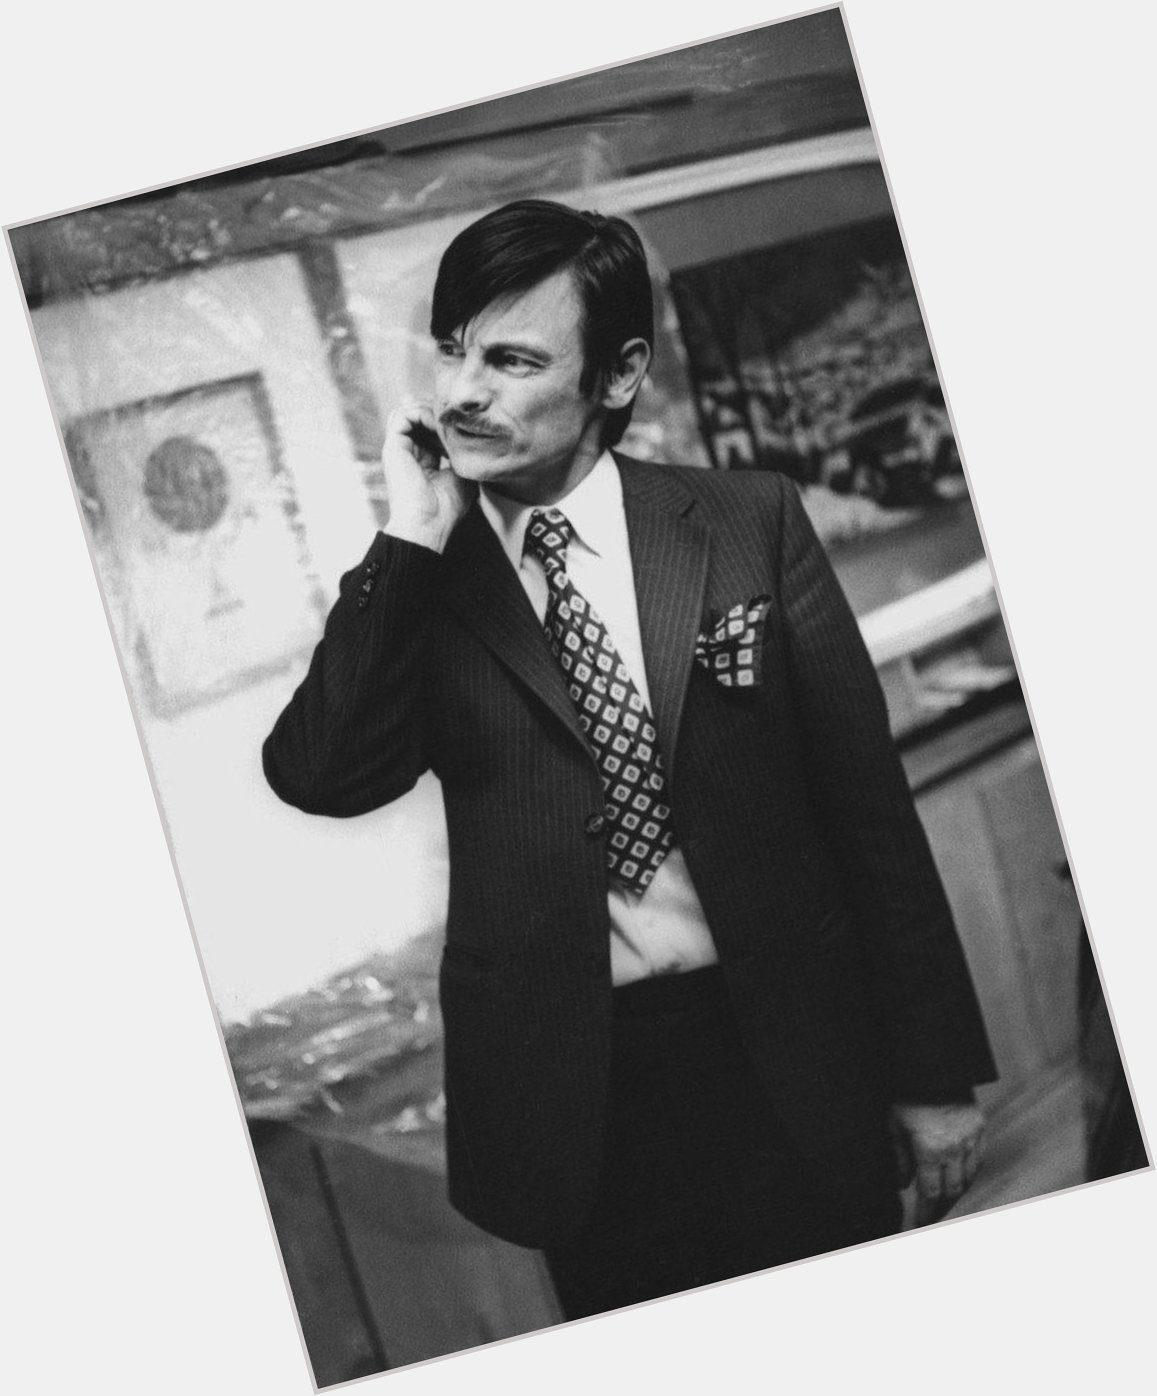 I just wanna wish the ultimate drip king, Mr. Andrei Tarkovsky, a really Happy Birthday wherever he is <3 